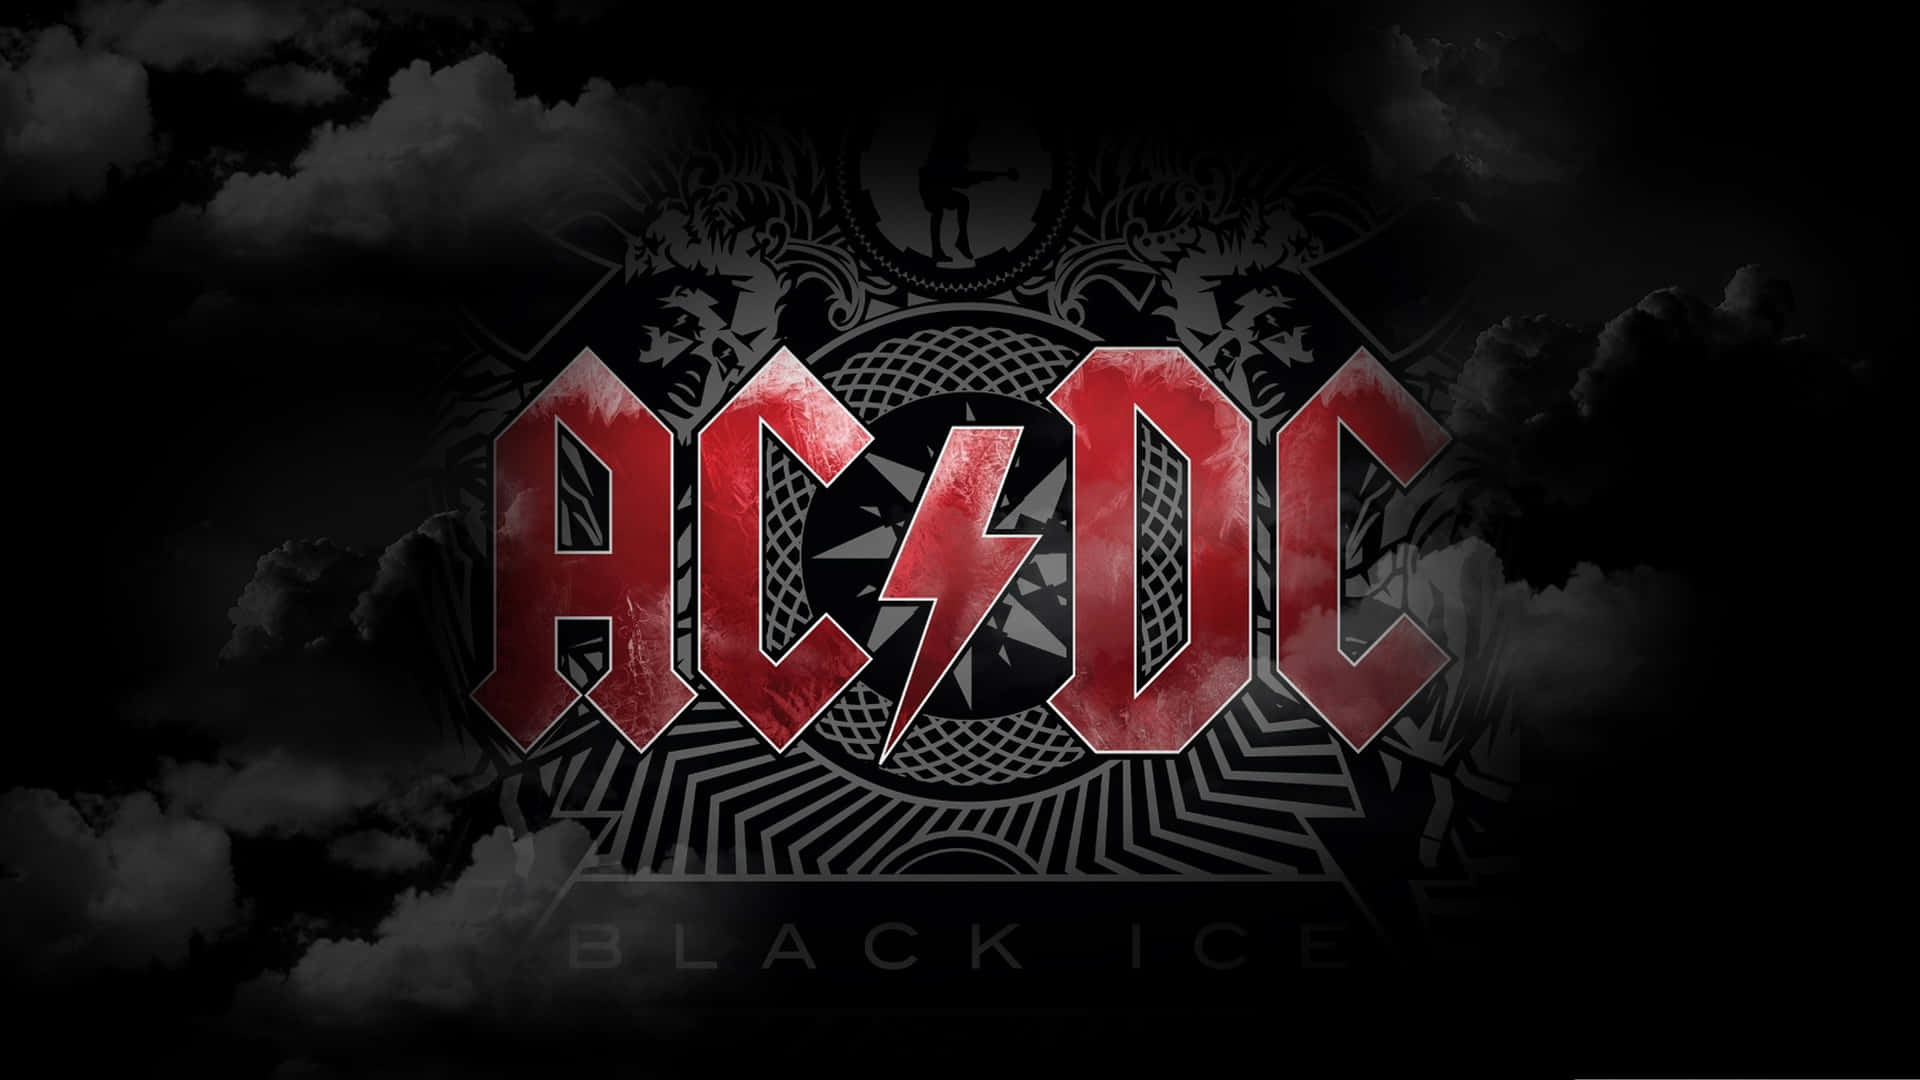 Rock Out with the Legends of AC/DC Wallpaper